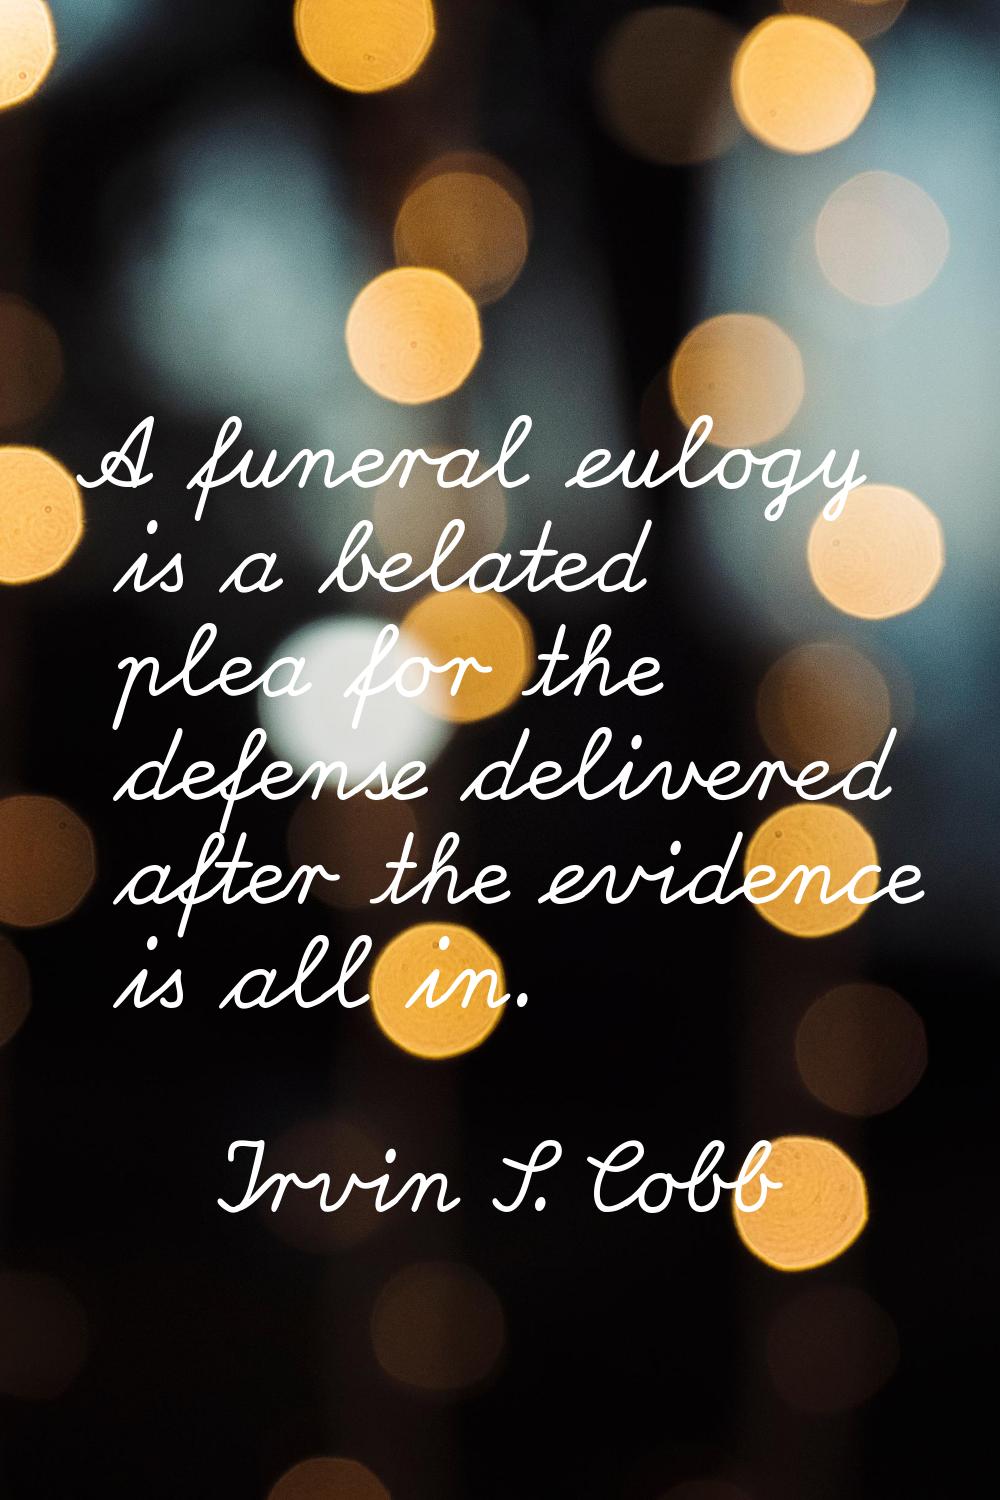 A funeral eulogy is a belated plea for the defense delivered after the evidence is all in.